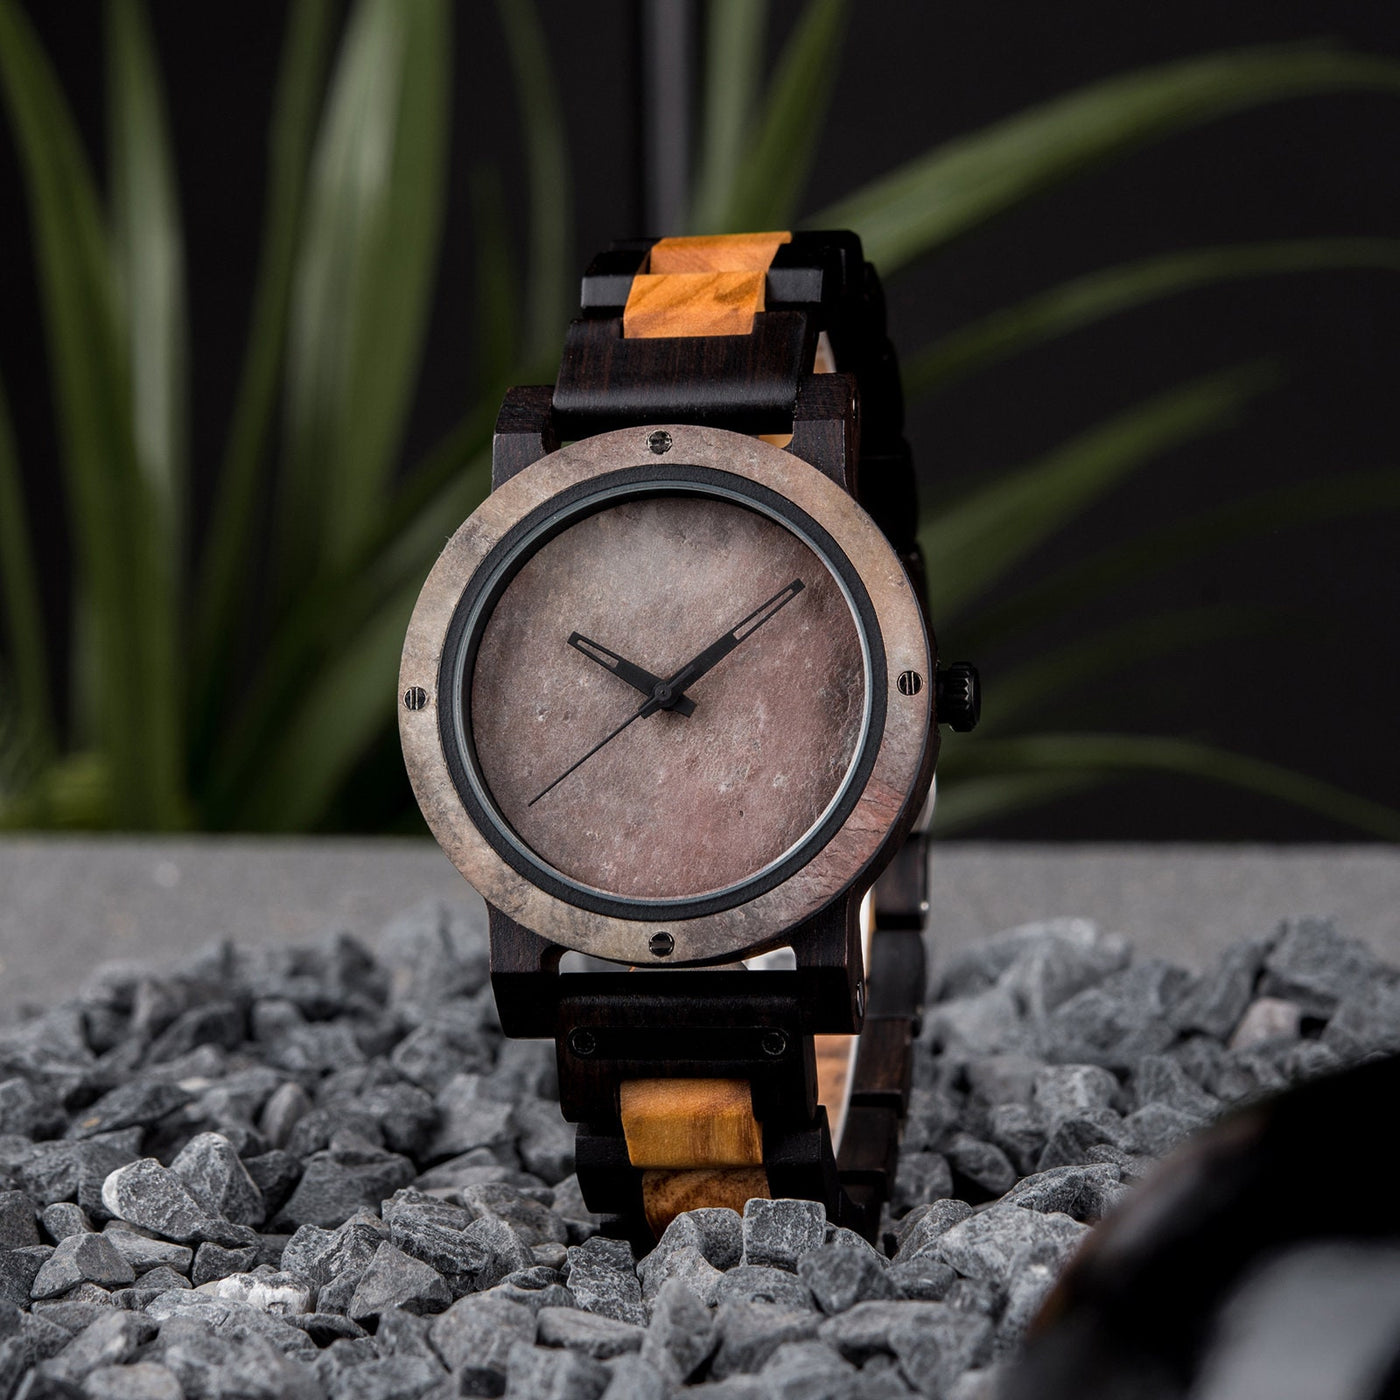 Engraved Wooden Watch.  Stone & Wood Watches for Men, personalized anniversary gift for him, unique birthday gift. Wood watch with engraving